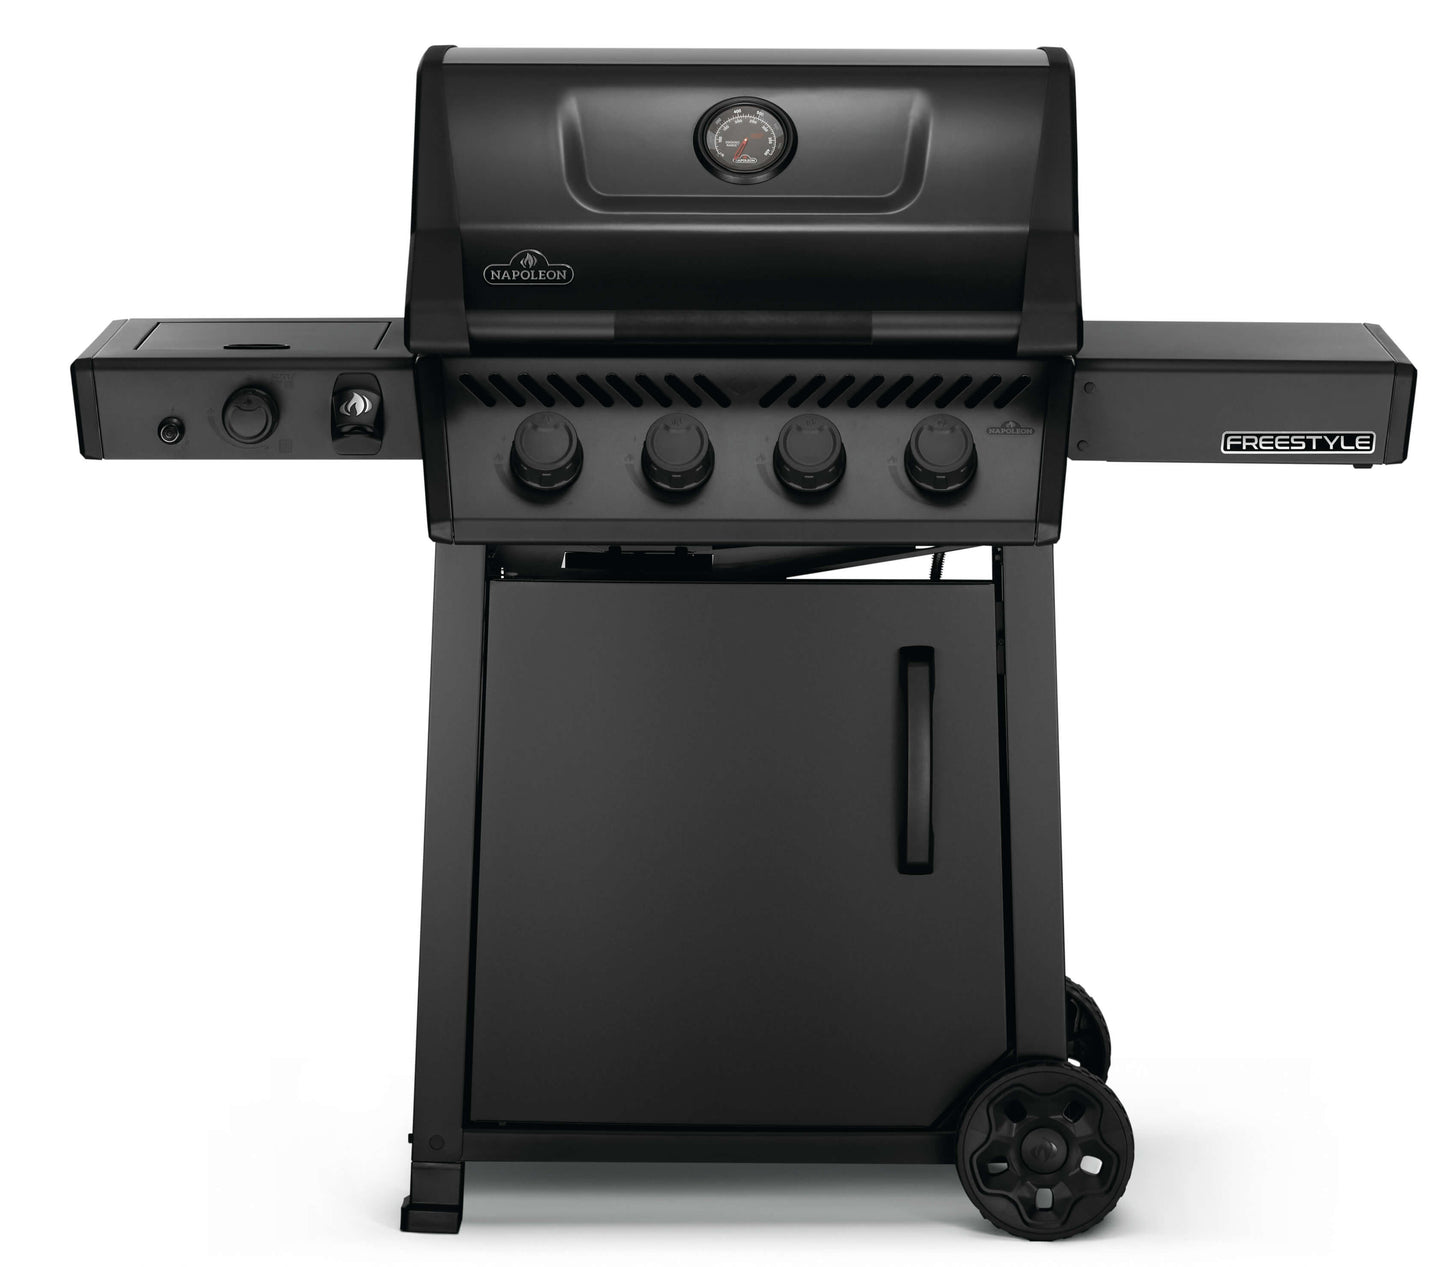 Freestyle barbecue in black